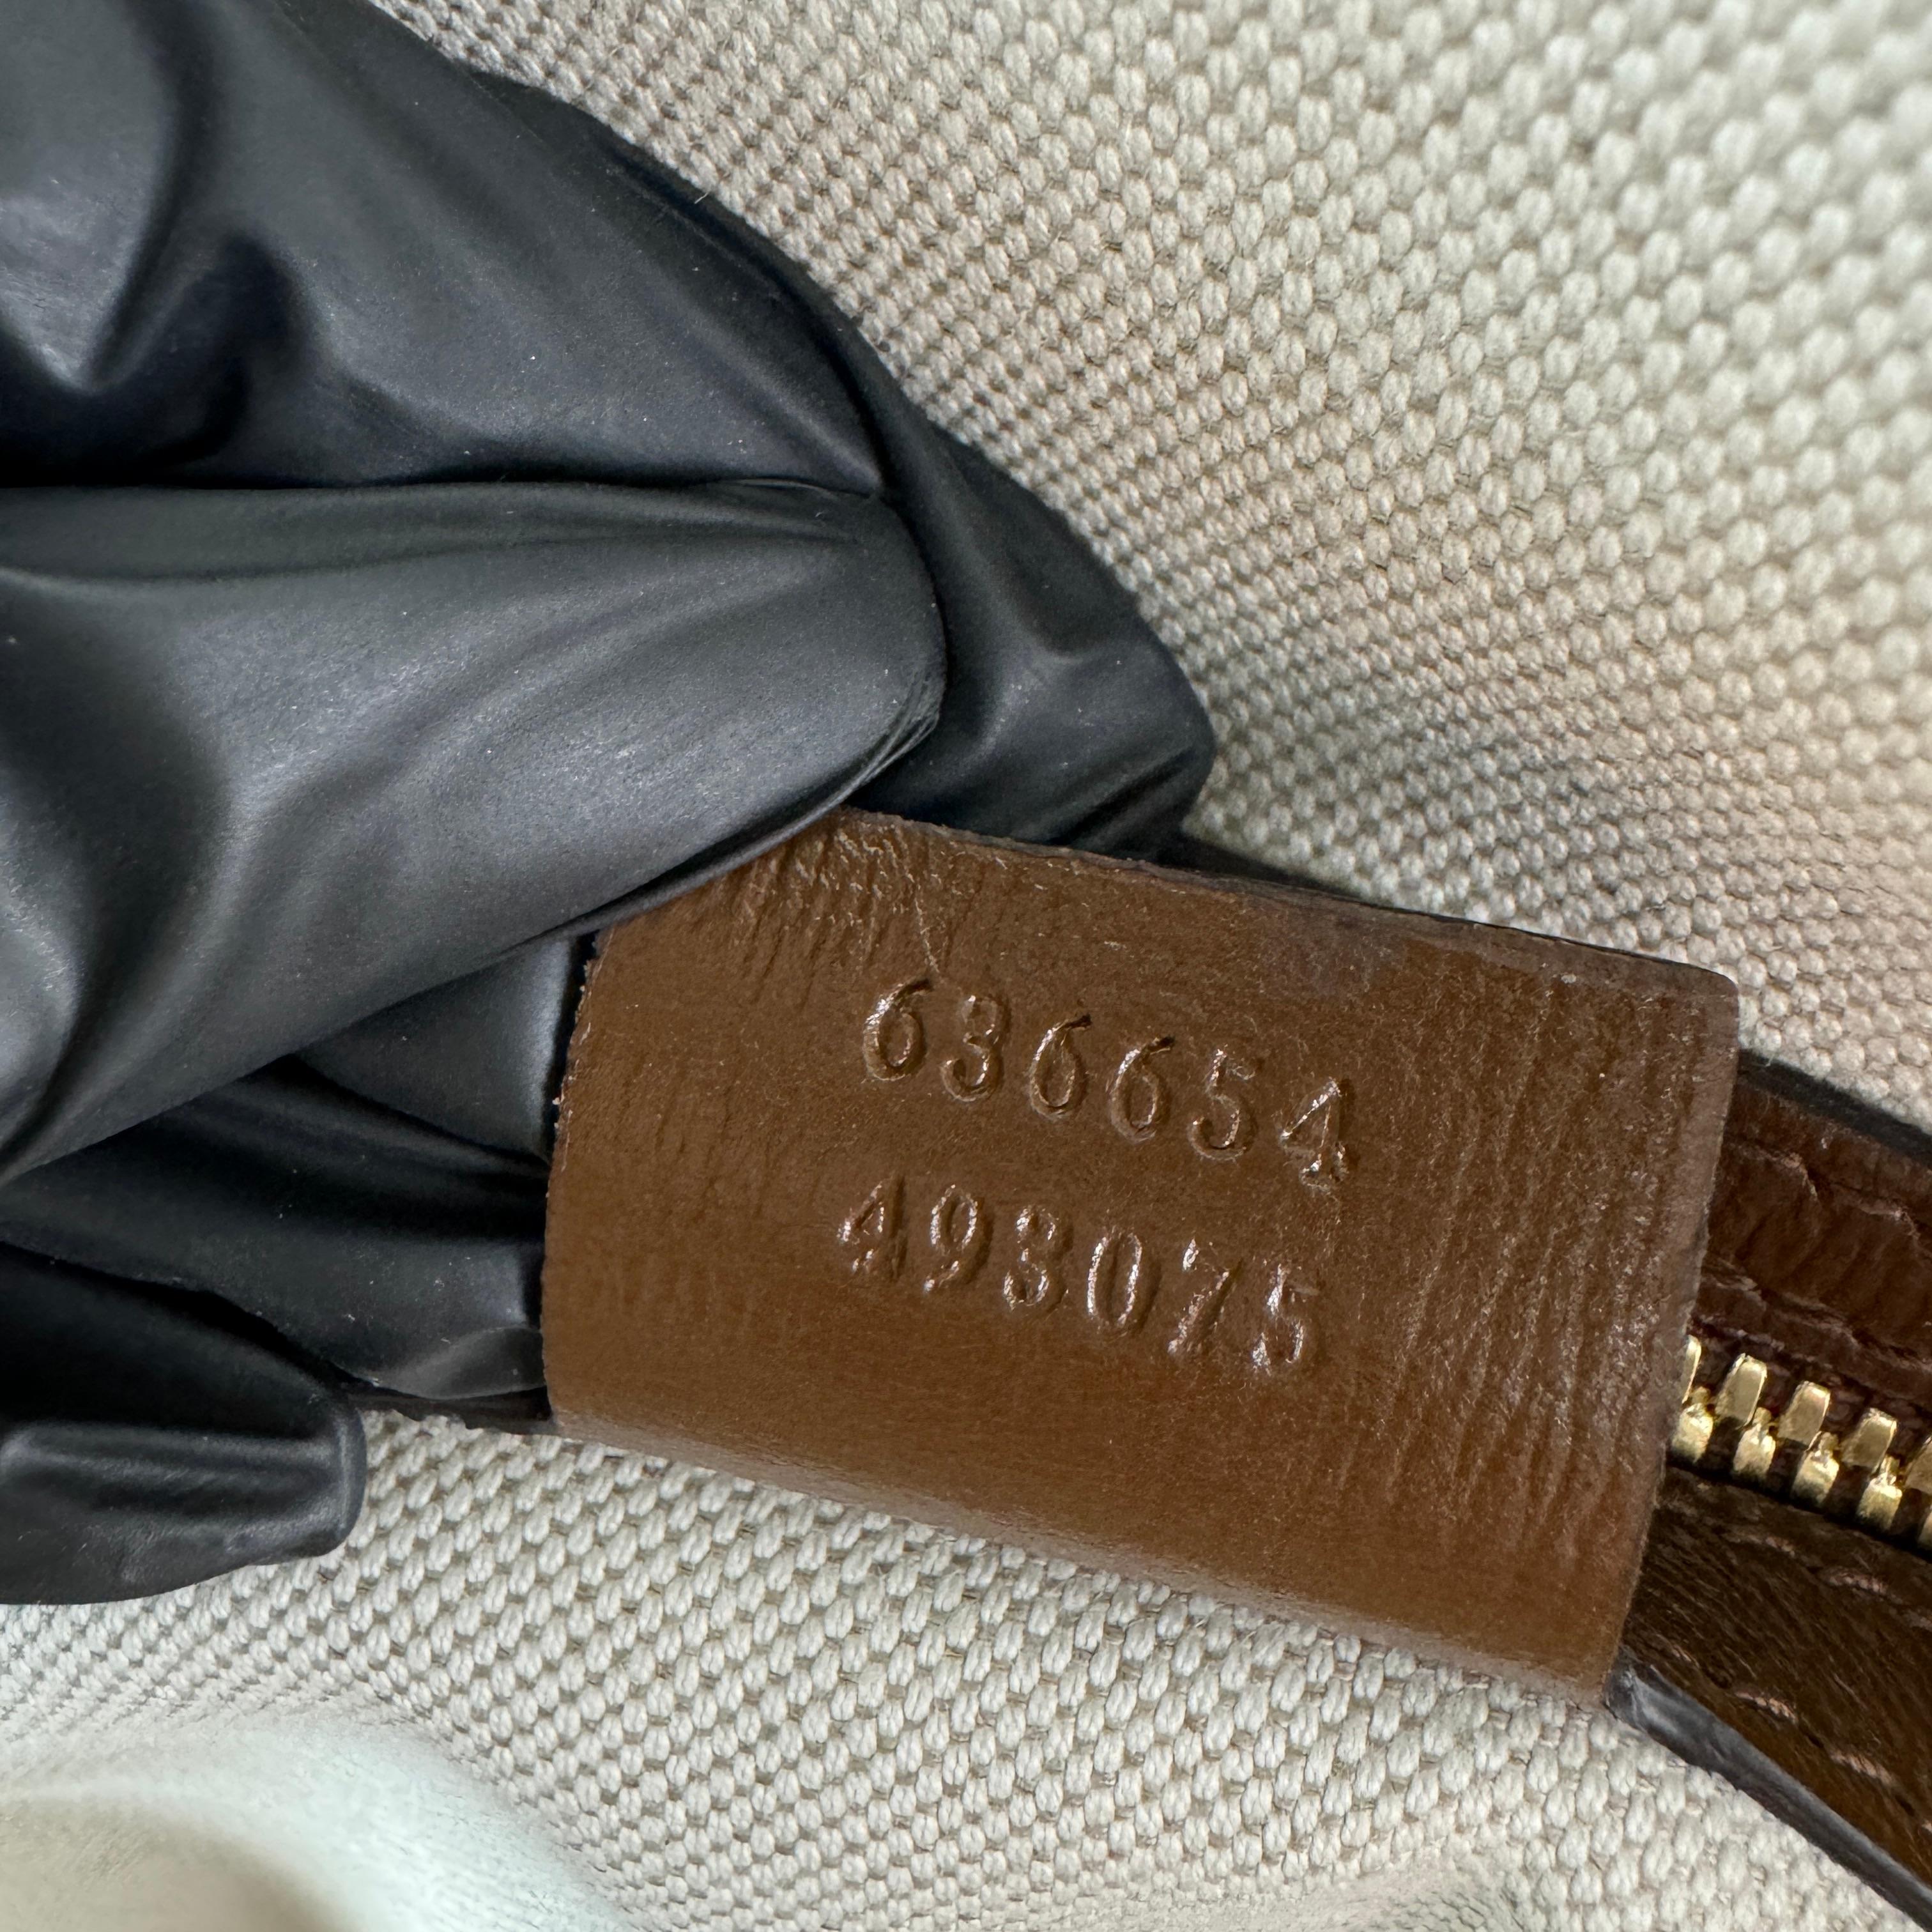 Authentic estate Gucci Fake Not GG Supreme canvas & leather backpack bag; zipper closure